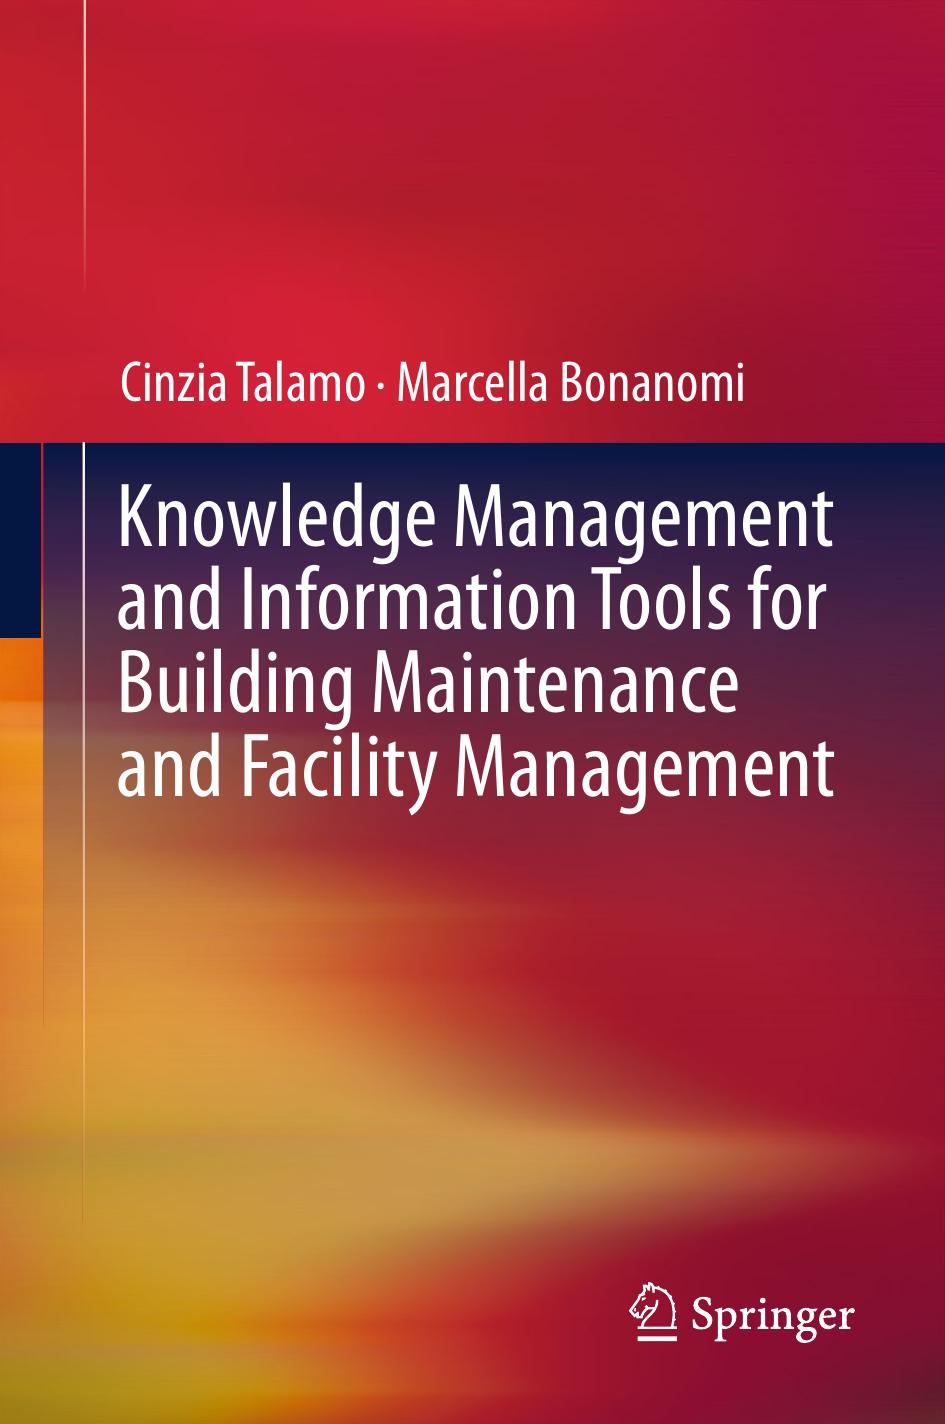 Knowledge Management and Information Tools for Building Maintenance and Facility Management 2017